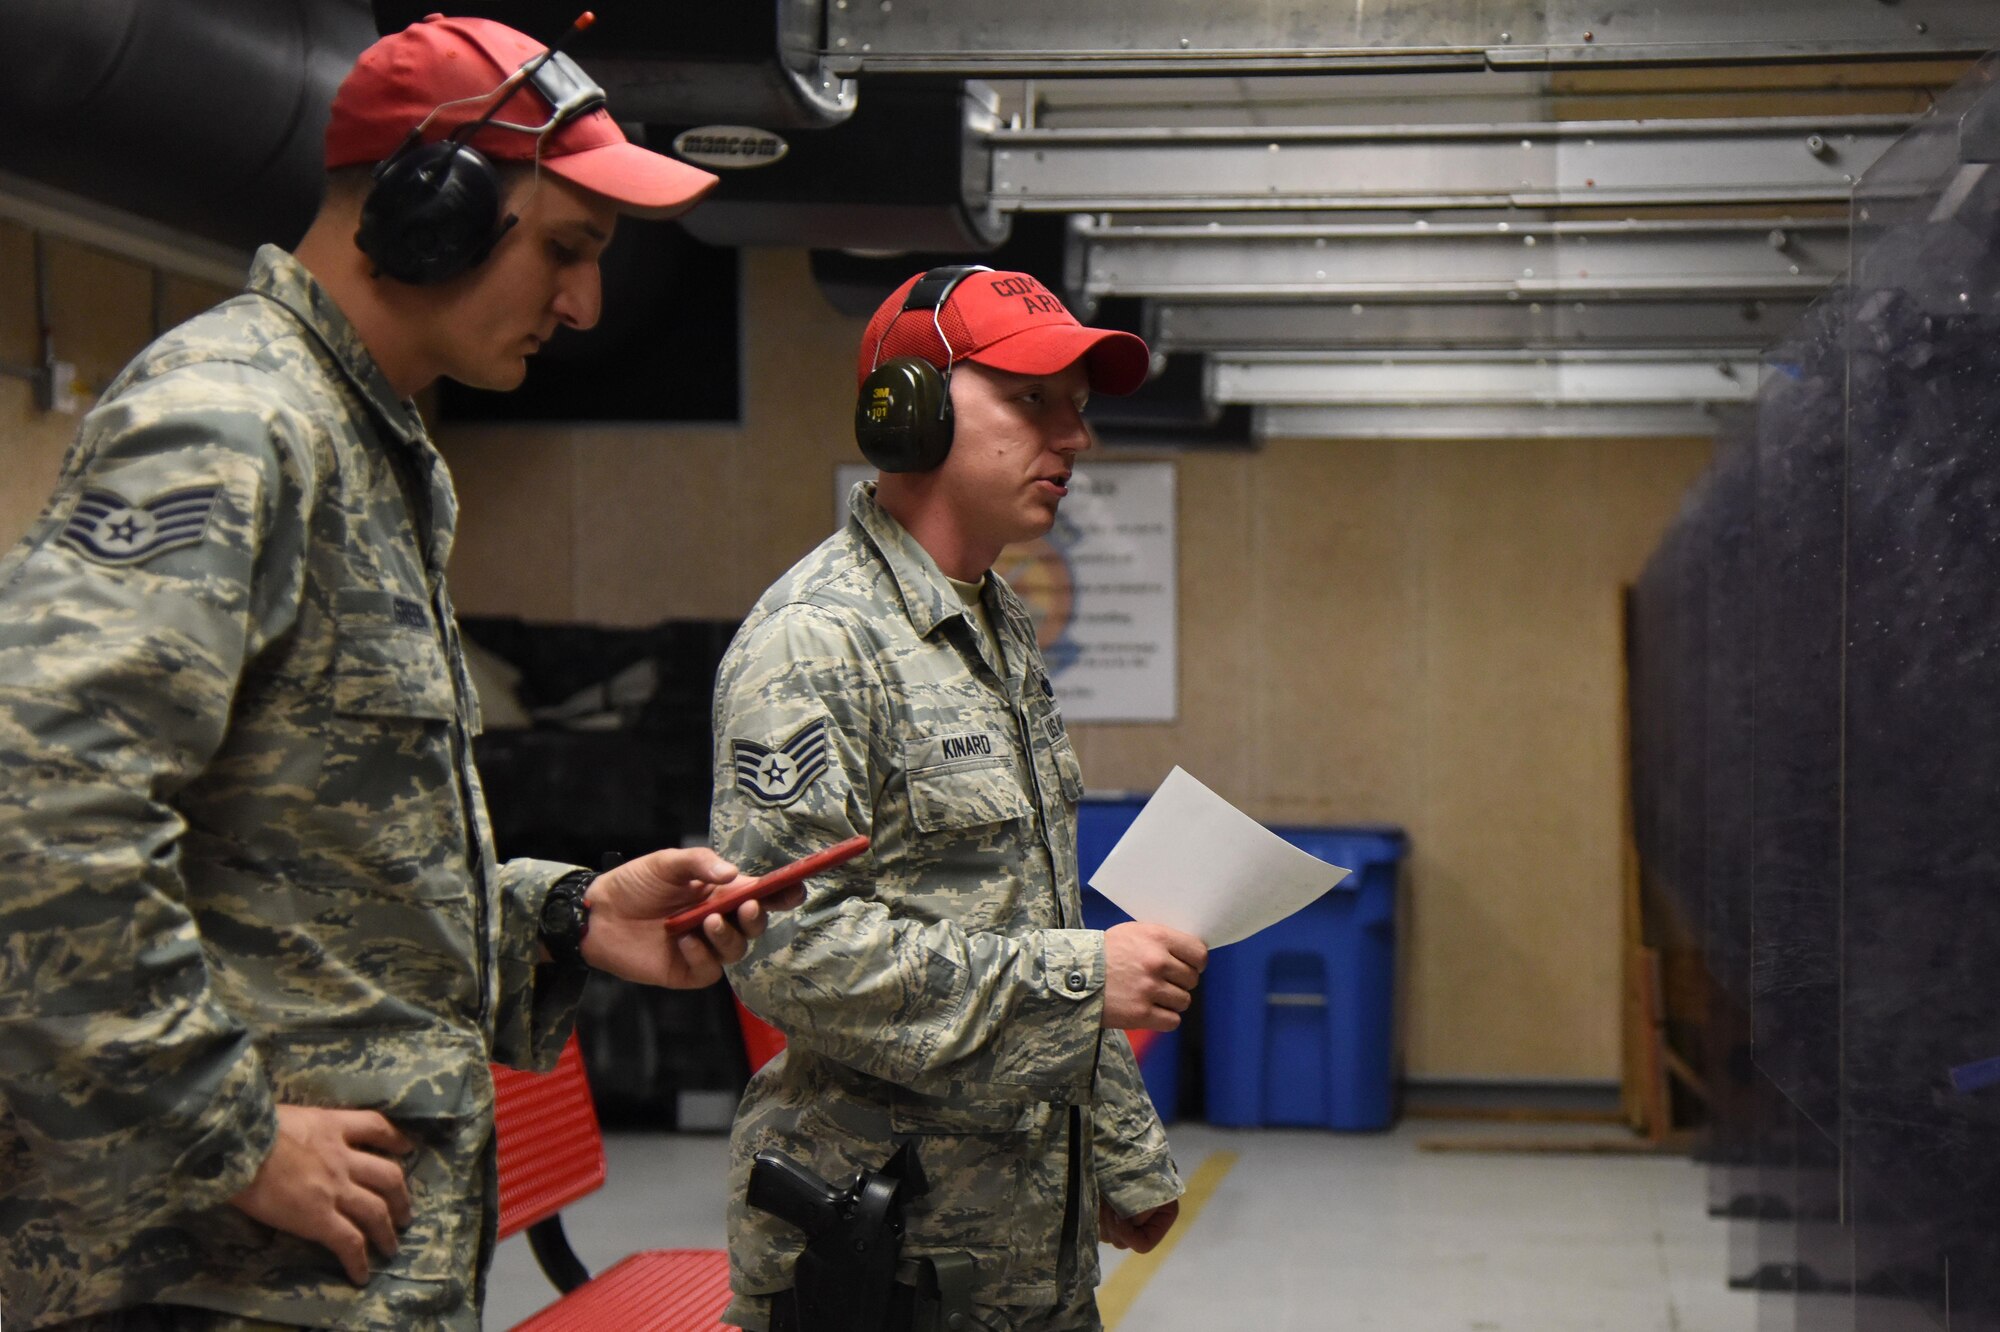 Staff Sgt. Joshua Green, 81st Security Forces Squadron combat arms instructor, operates the timer while Staff Sgt. Jarrod Kinard, 81st SFS combat arms NCOIC, reads the rules to competitors during the 81st SFS law enforcement team competition shoot in the indoor firing range May 17, 2017, on Keesler Air Force Base, Miss. The event was held during National Police Week, which recognizes the service of law enforcement men and women who put their lives at risk every day. (U.S. Air Force photo by Kemberly Groue)